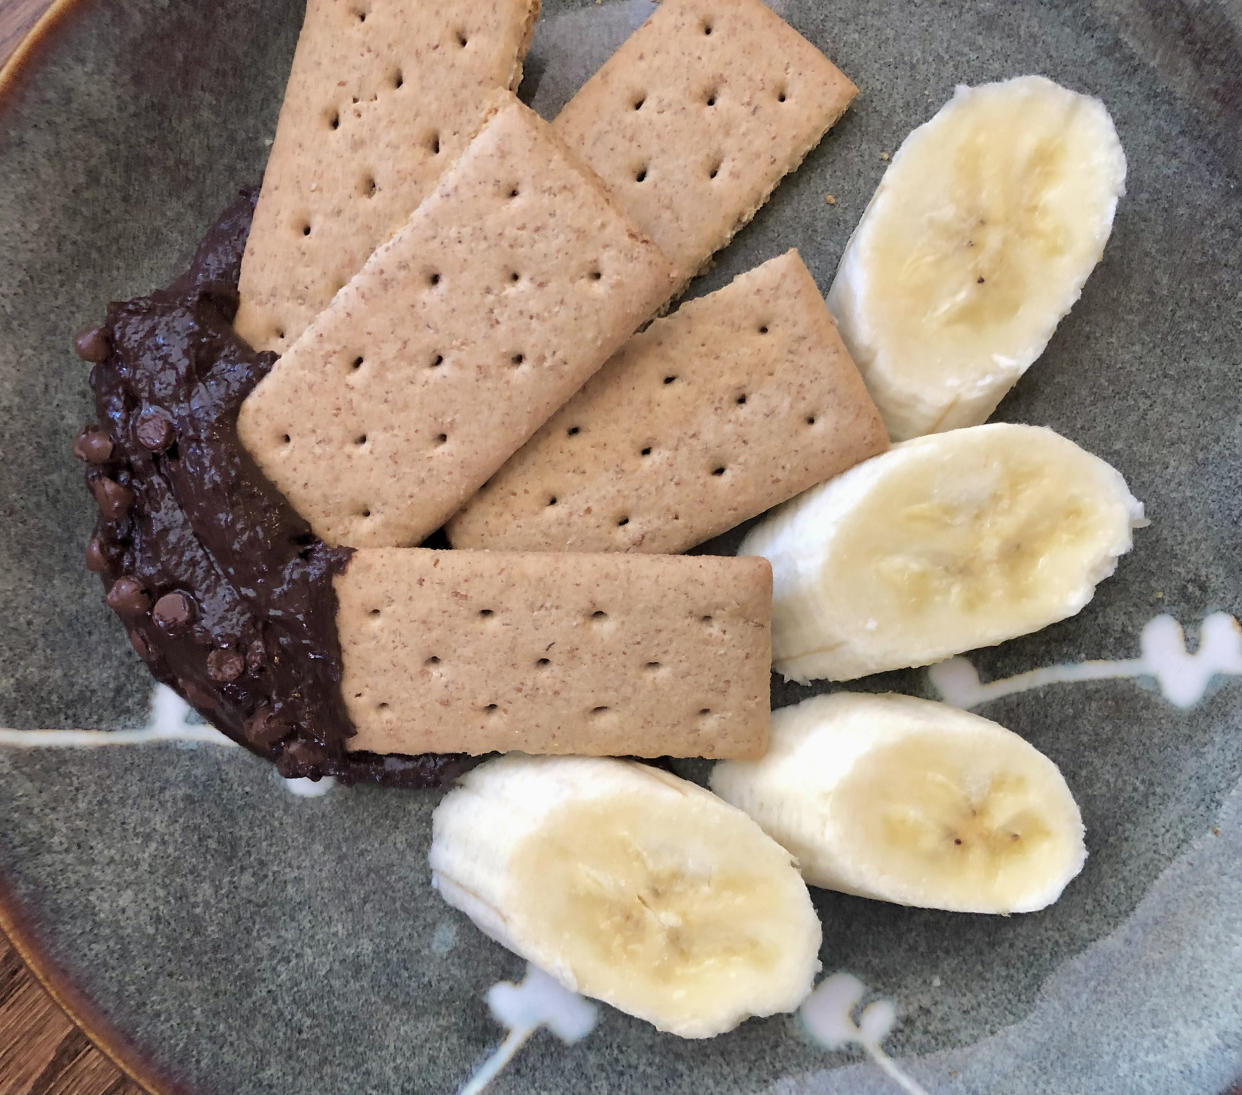 Nothing says summer like a s’mores-y banana thing. No campfire required. (Heather Martin)